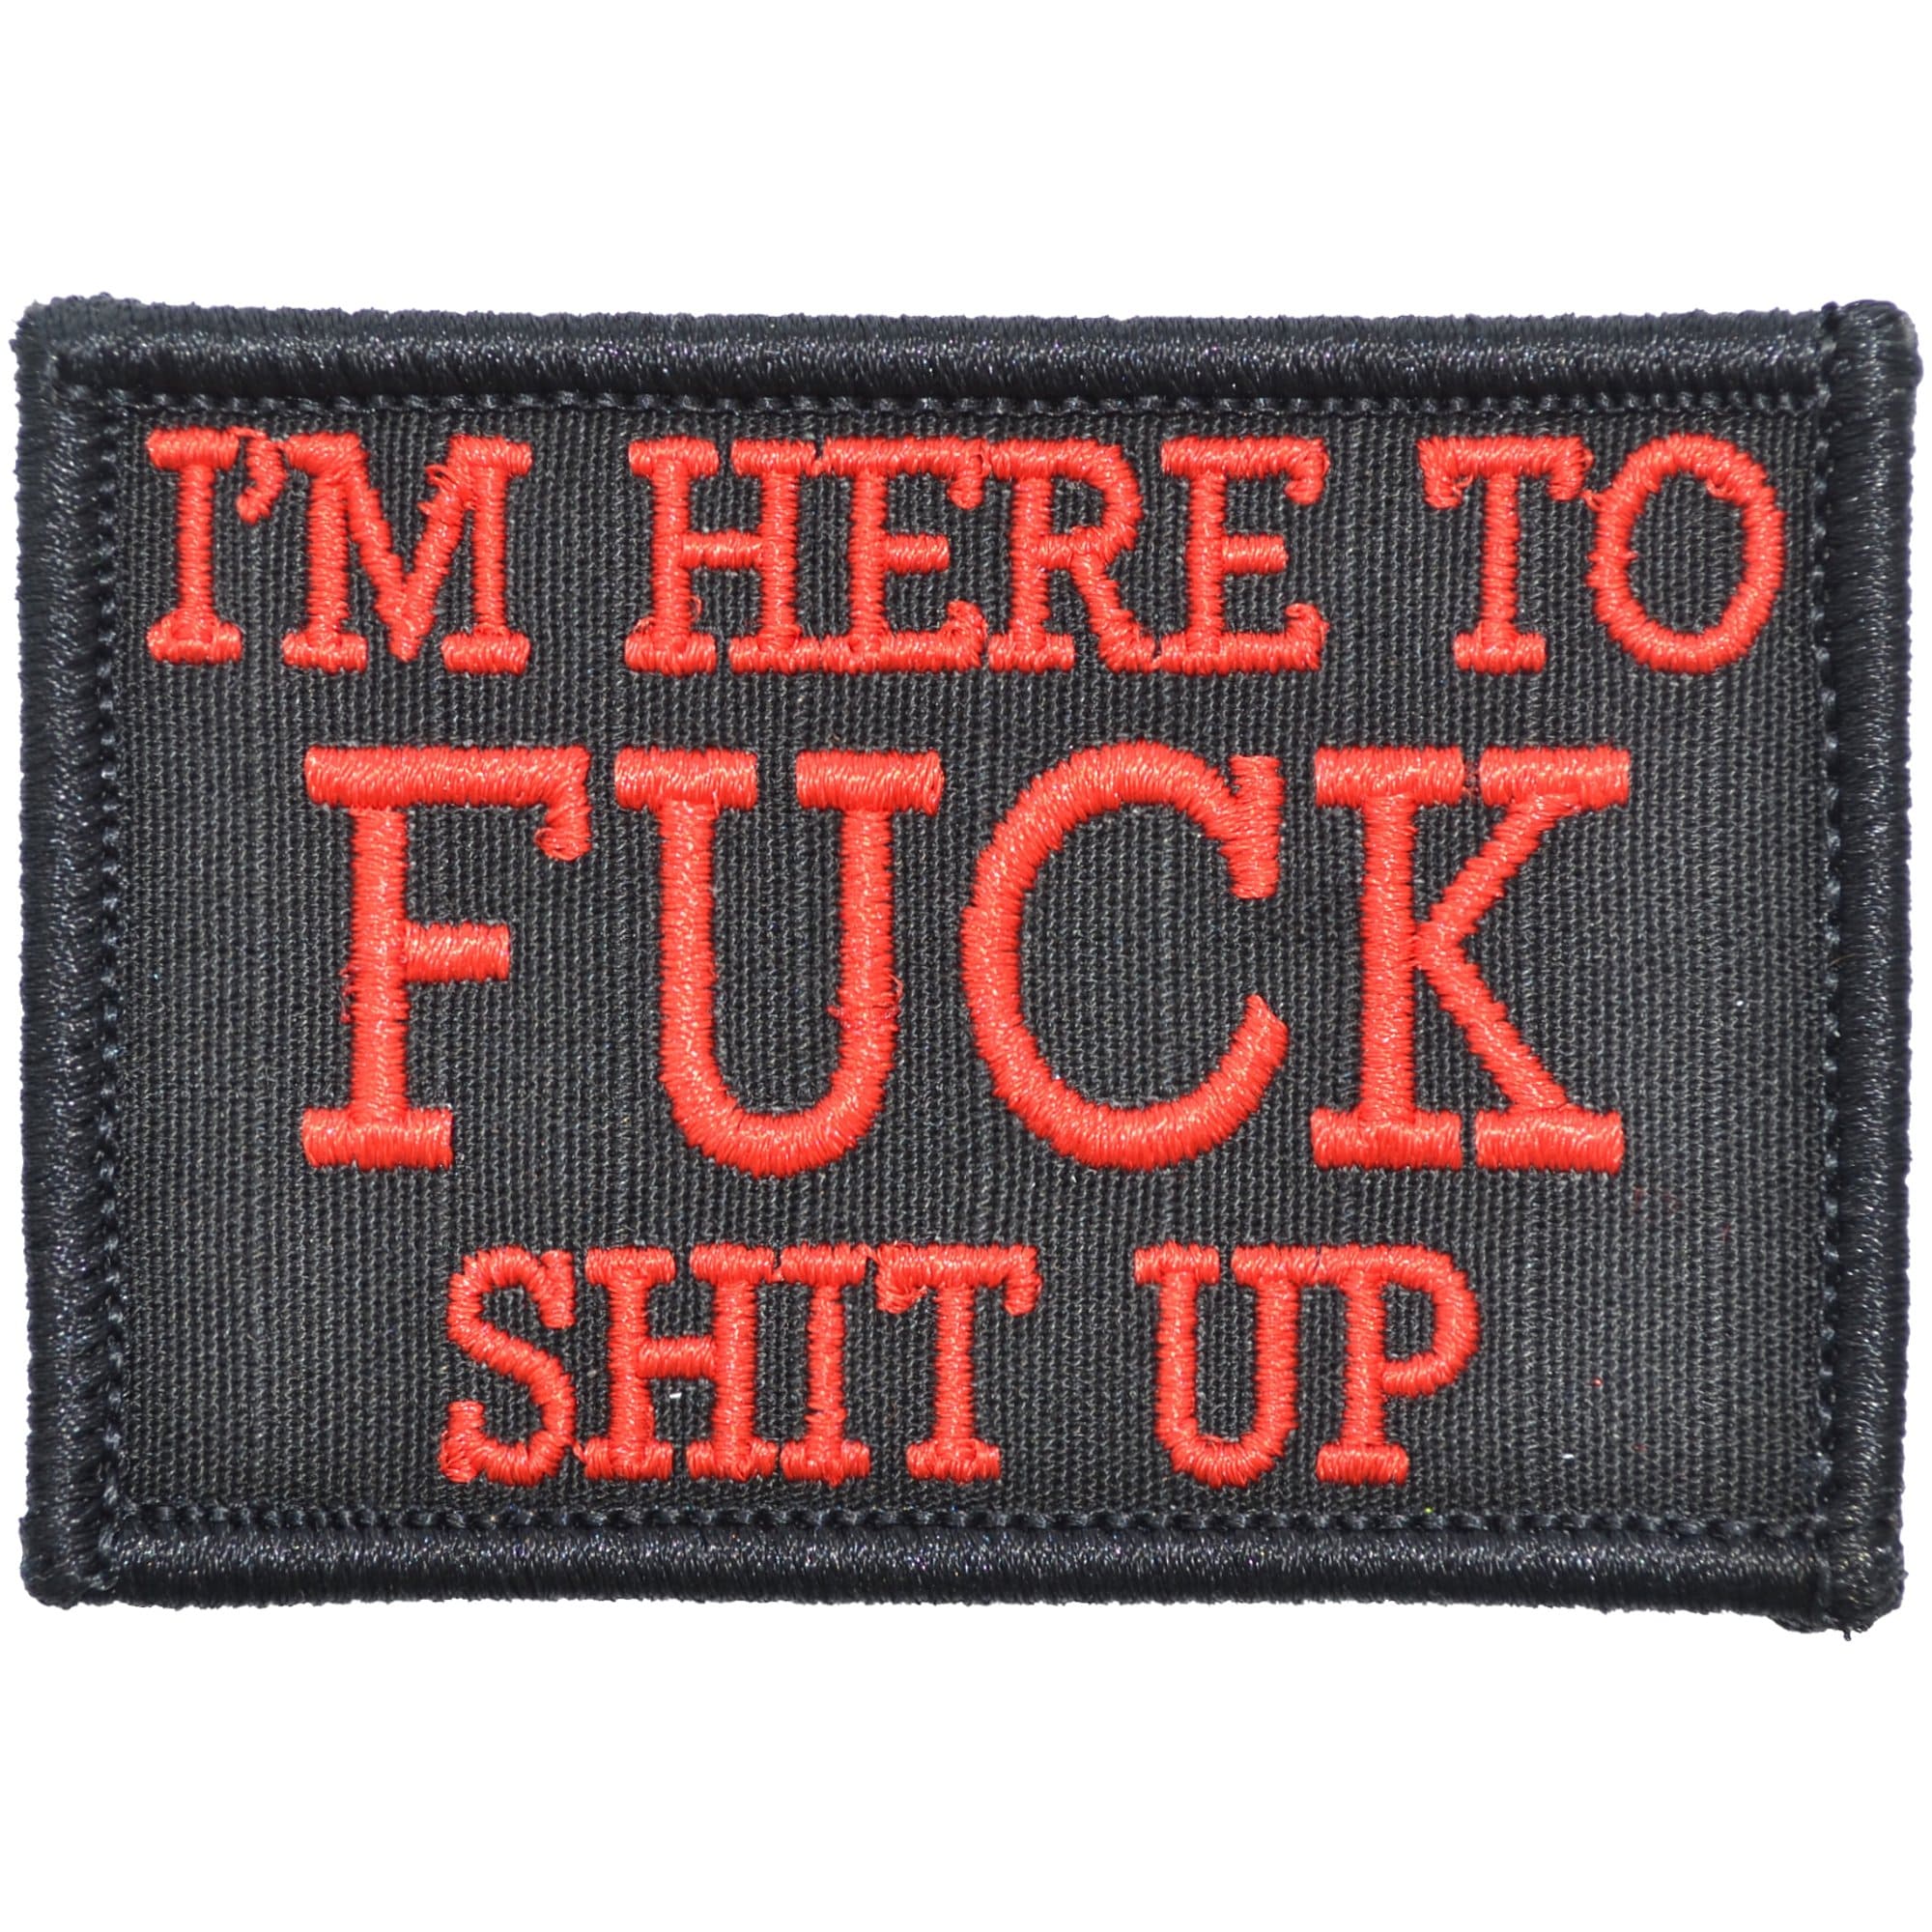 Tactical Gear Junkie Patches Black w/ Red I'm Here to Fuck Shit Up - 2x3 Patch